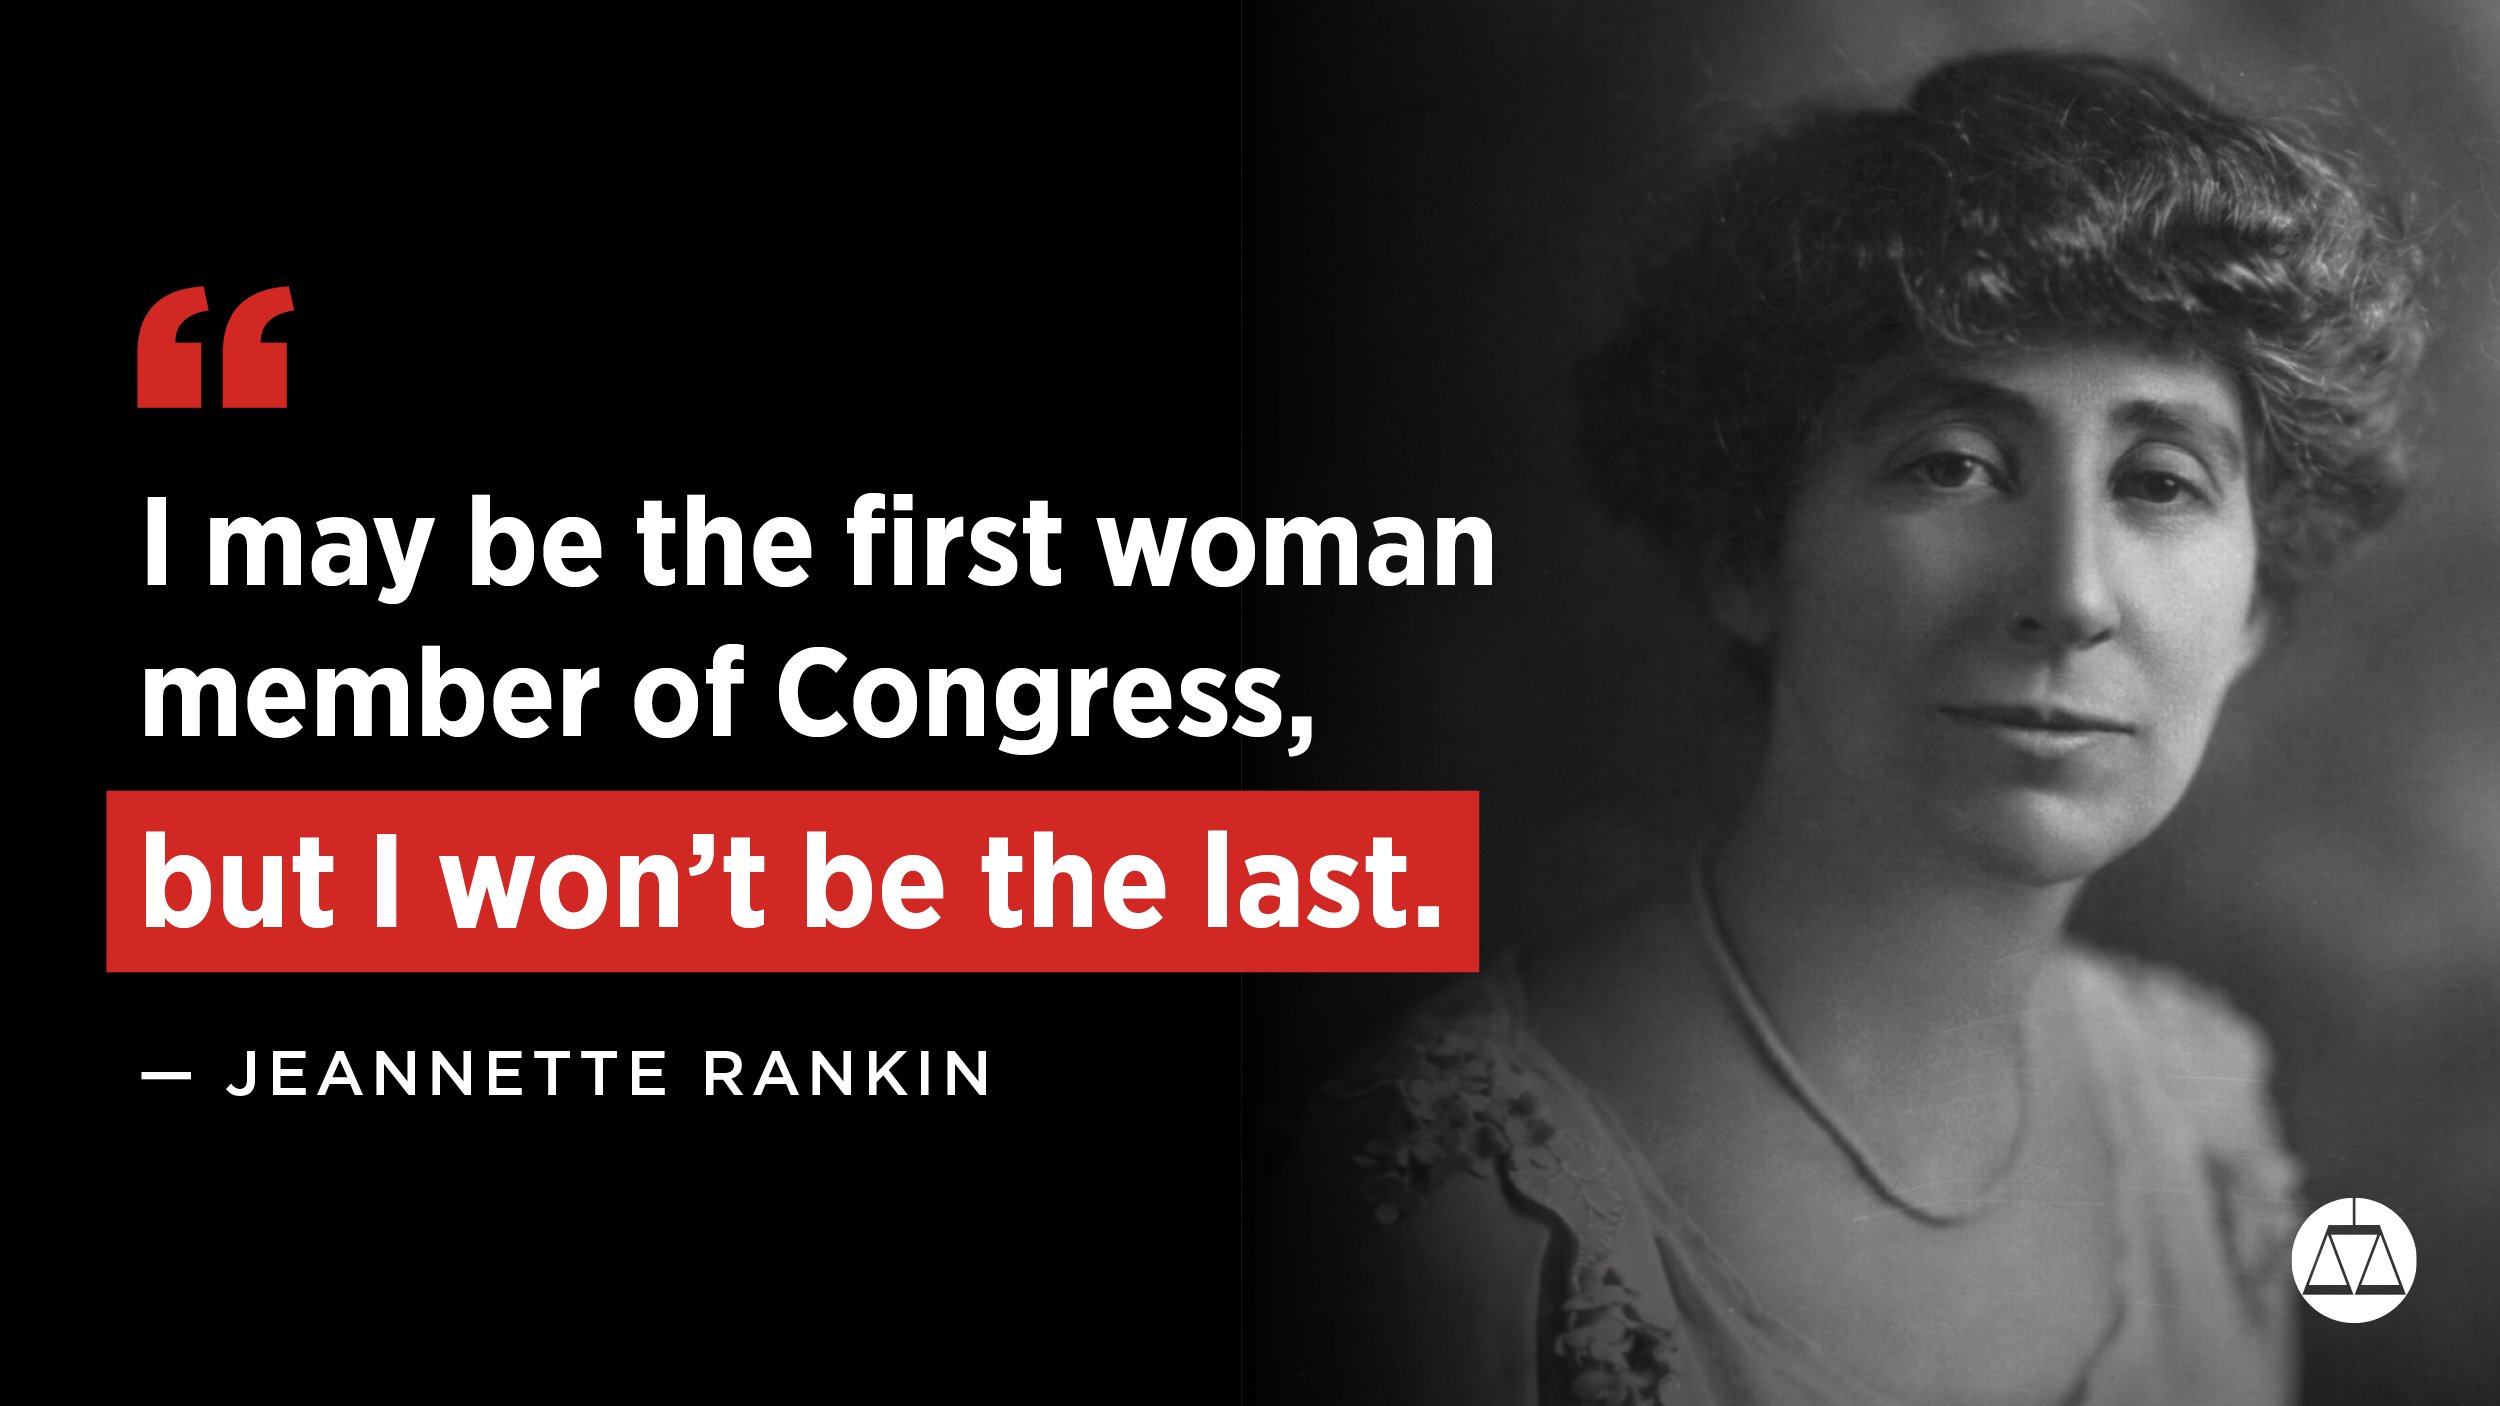 Southern Poverty Law Center on Twitter: "And she wasn't. Jeannette Rankin was sworn into office #OTD more than a century ago. She championed the causes of women's rights and civil rights during